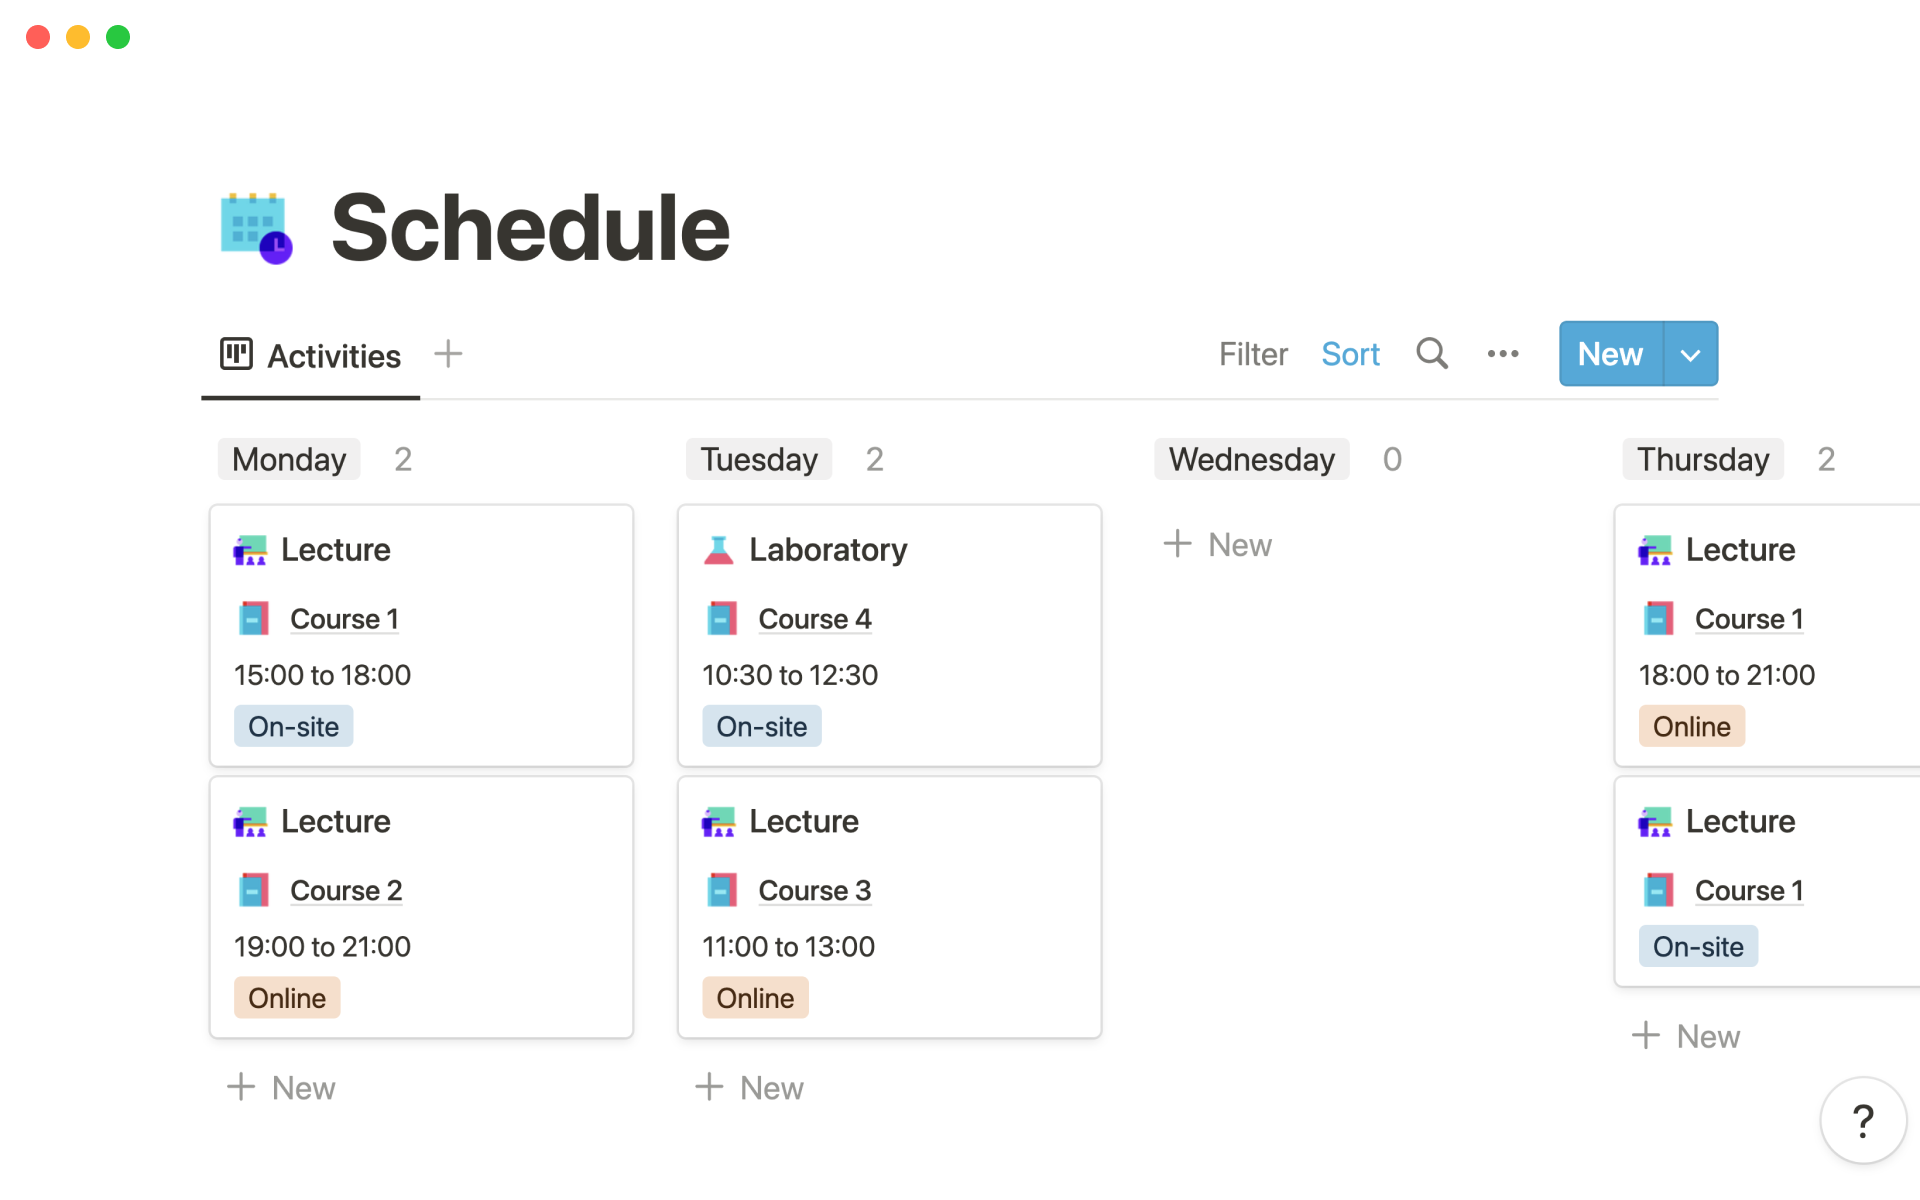 A solution to organize your duties, study better and track your learning habits as a student.